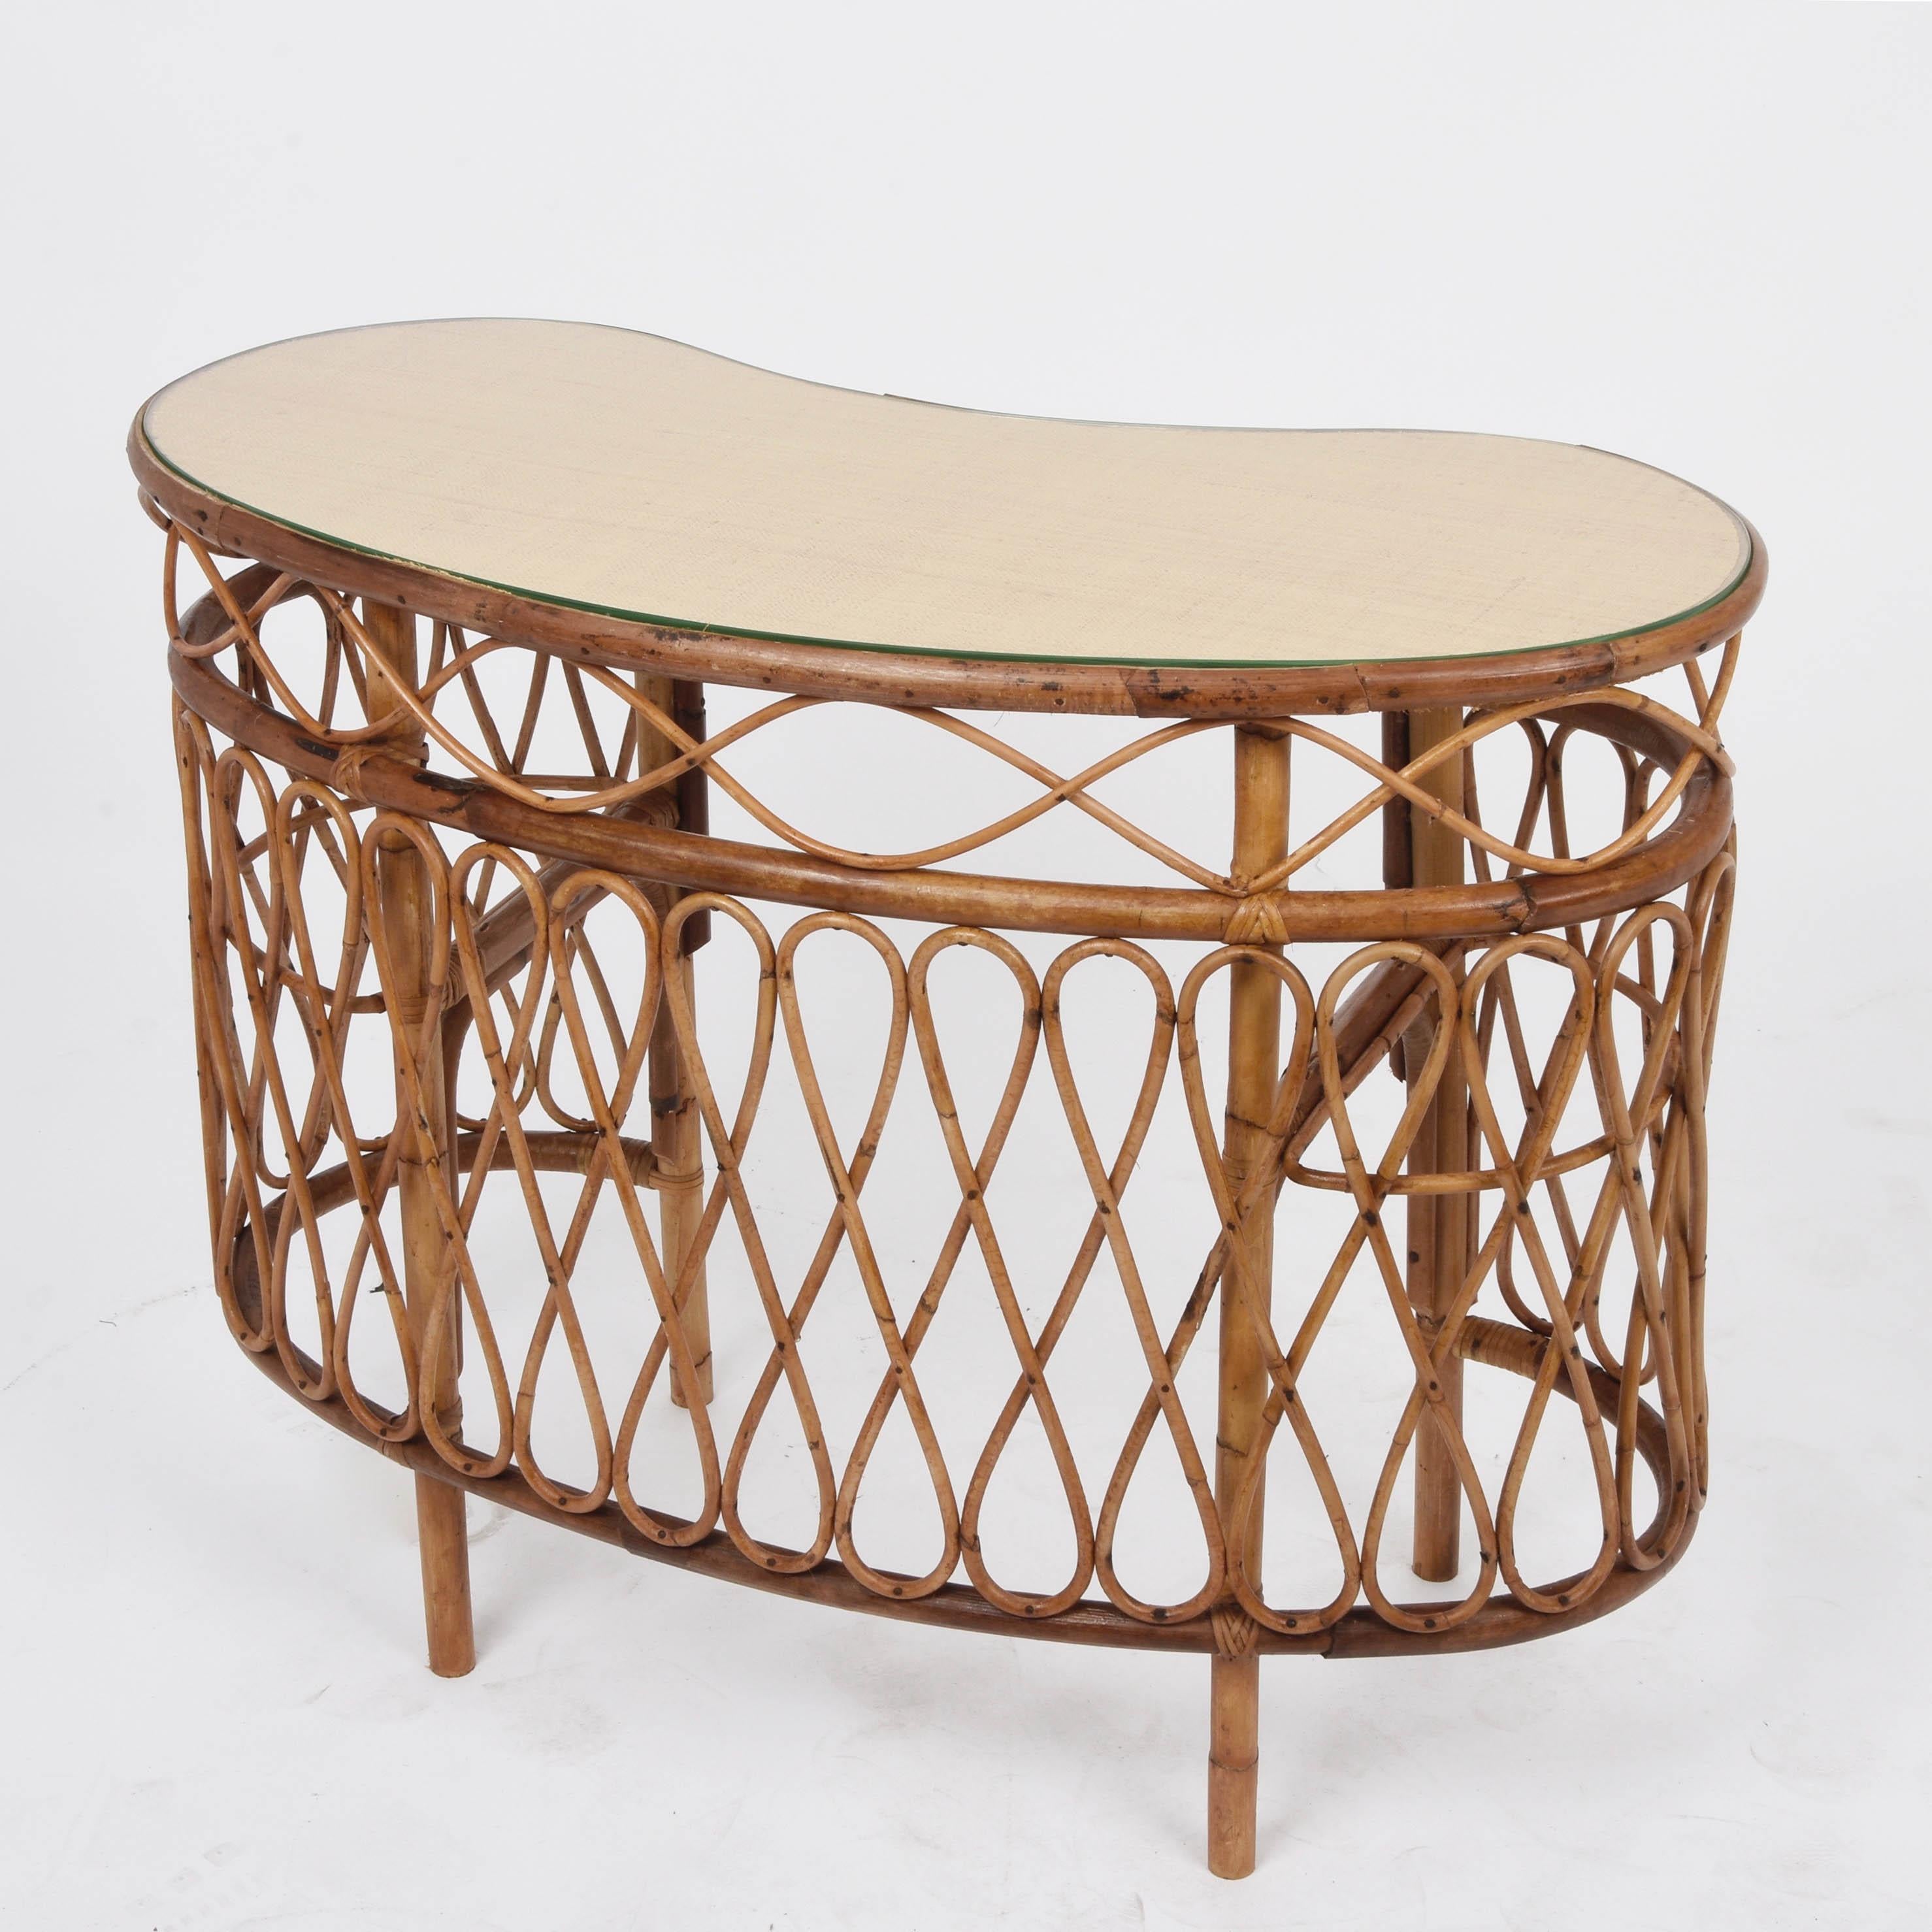 Mid-Century Modern Midcentury Bamboo Wicker and Glass Cocktail Console Table after Albini, 1970s